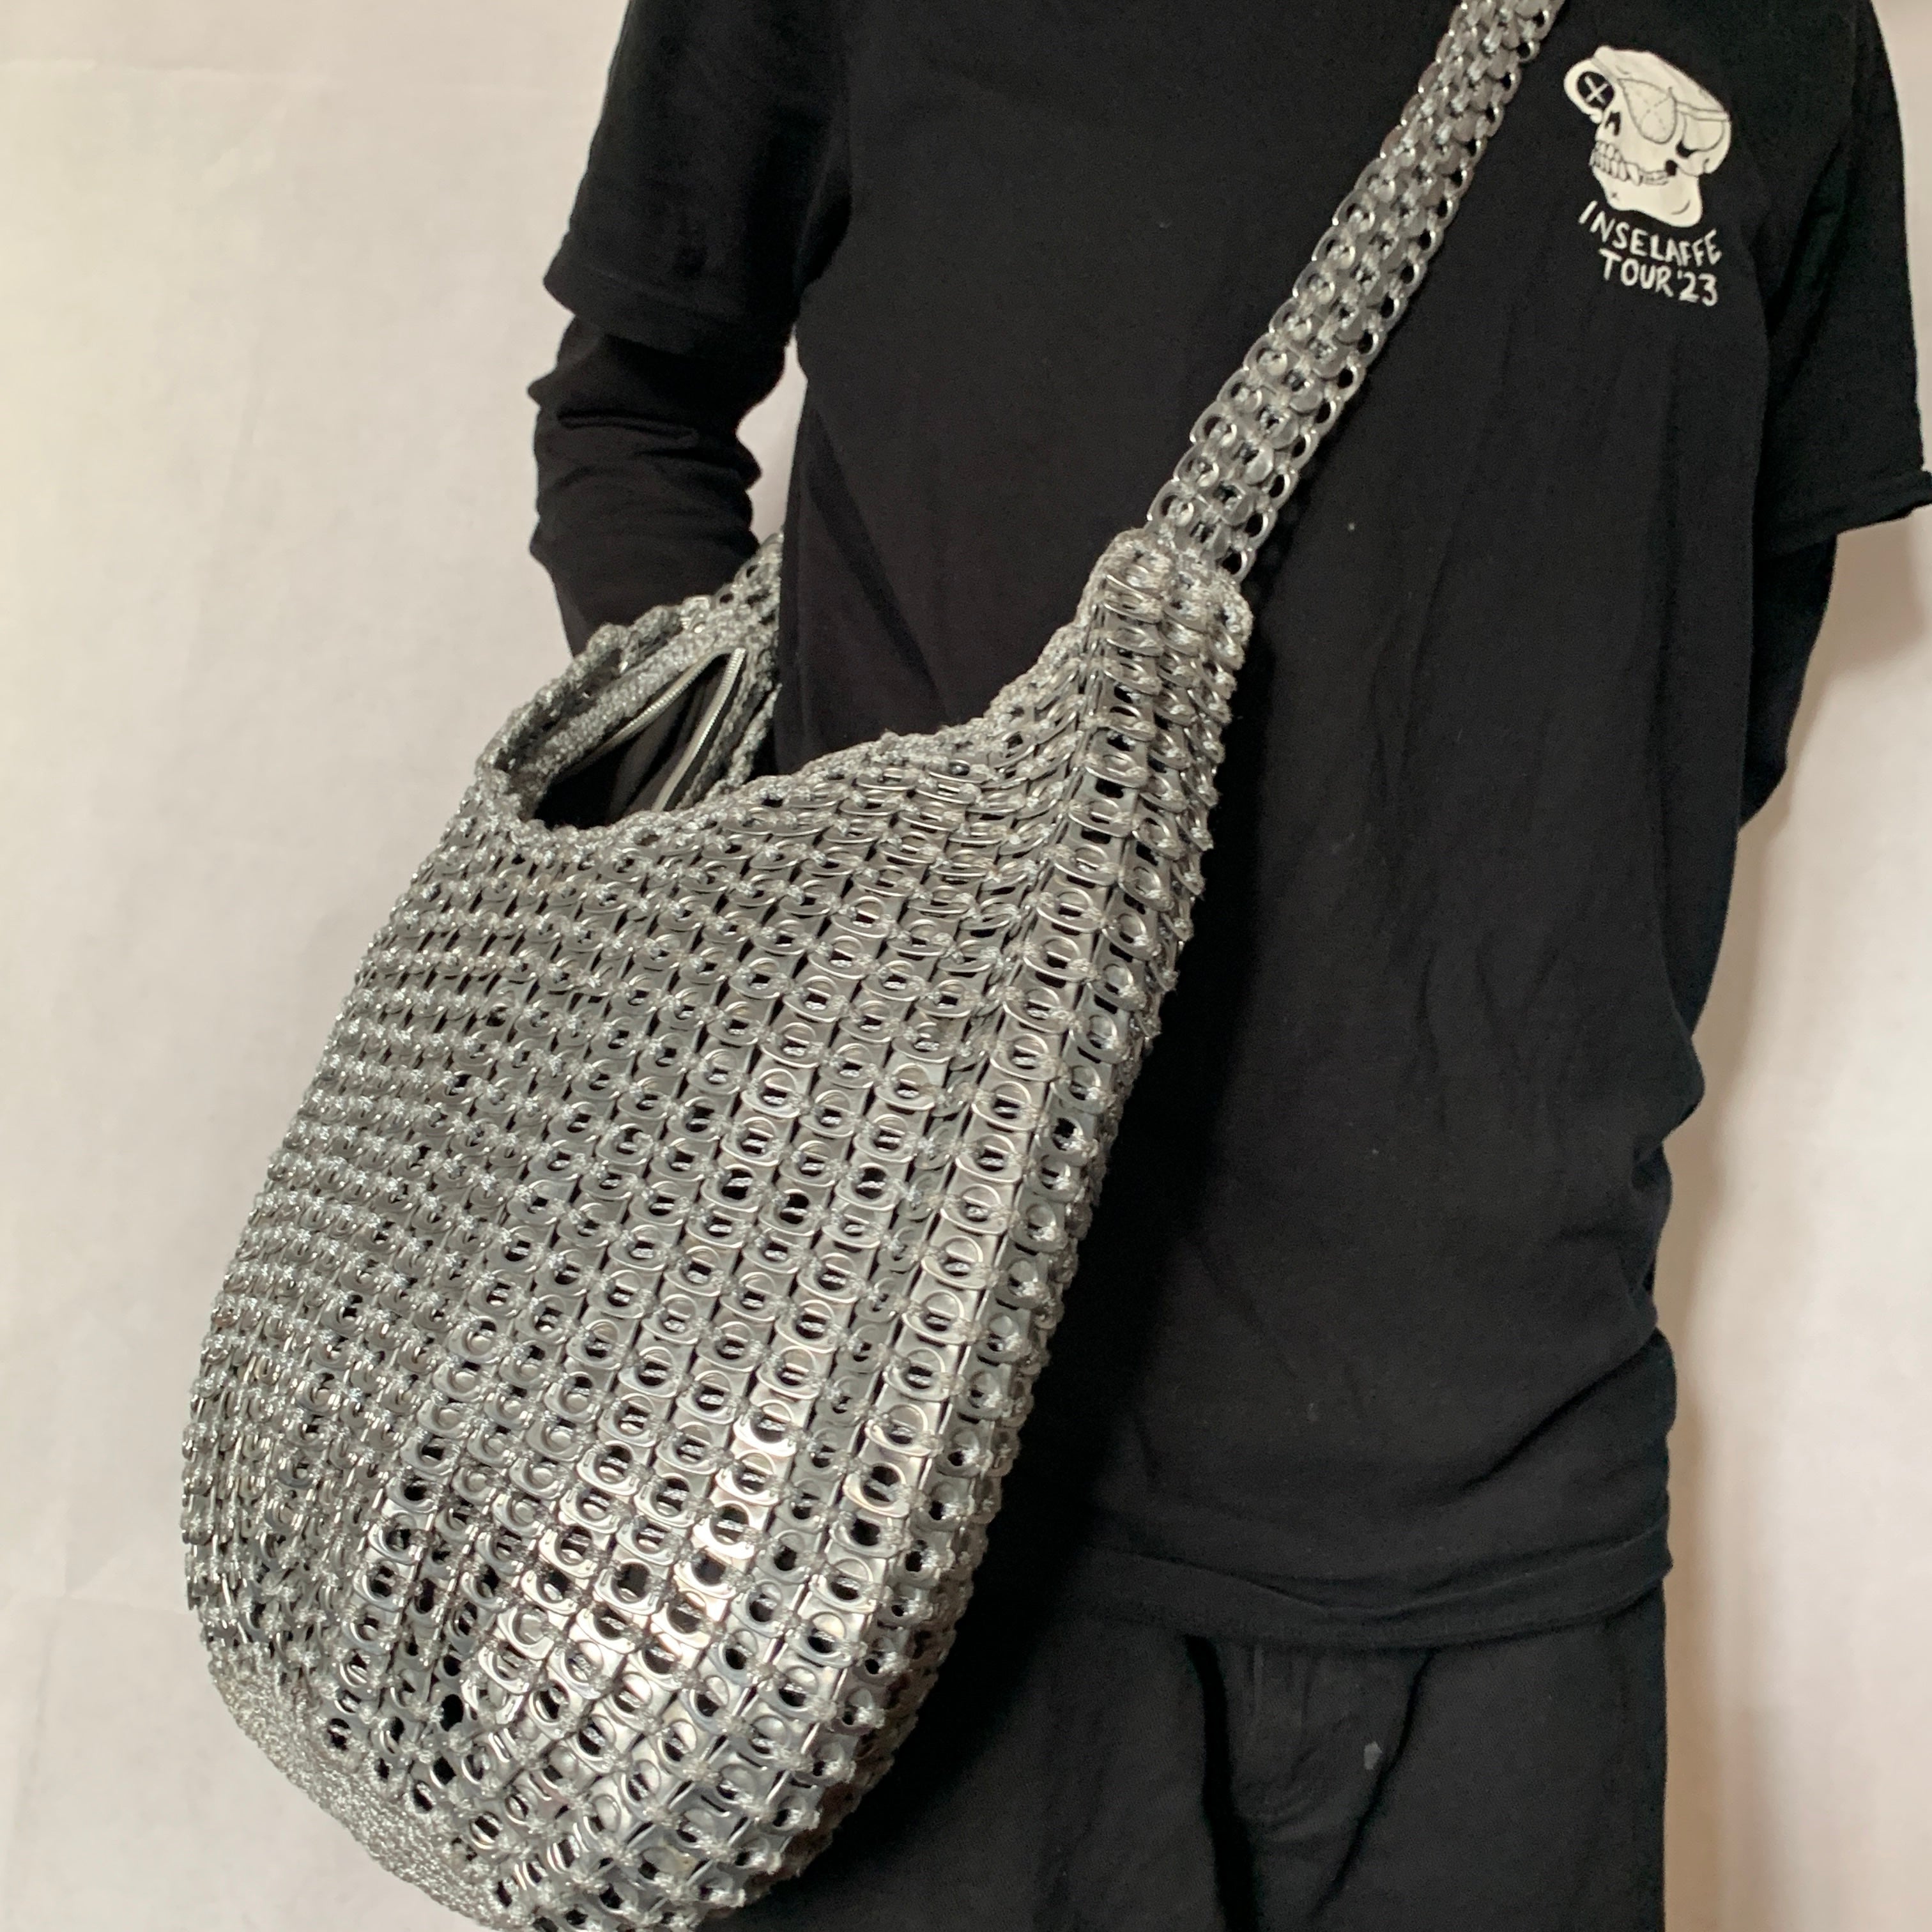 Silver Skye Shoulder Bag by Soda Pop - Handmade with Metallic Upcycled Ring-Pulls